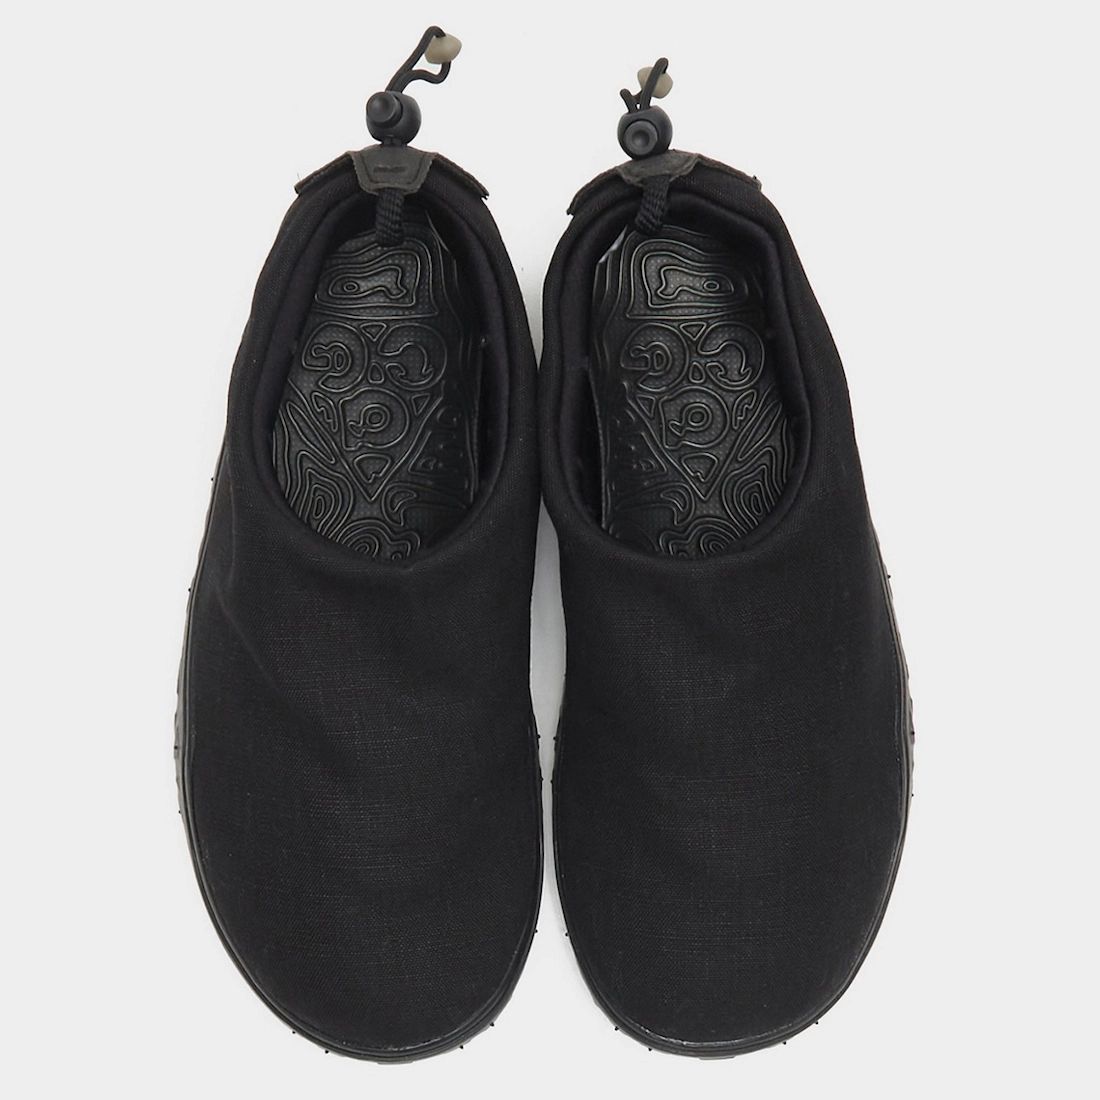 Nike ACG Air Moc Black Anthracite DZ3407-001 Release Date